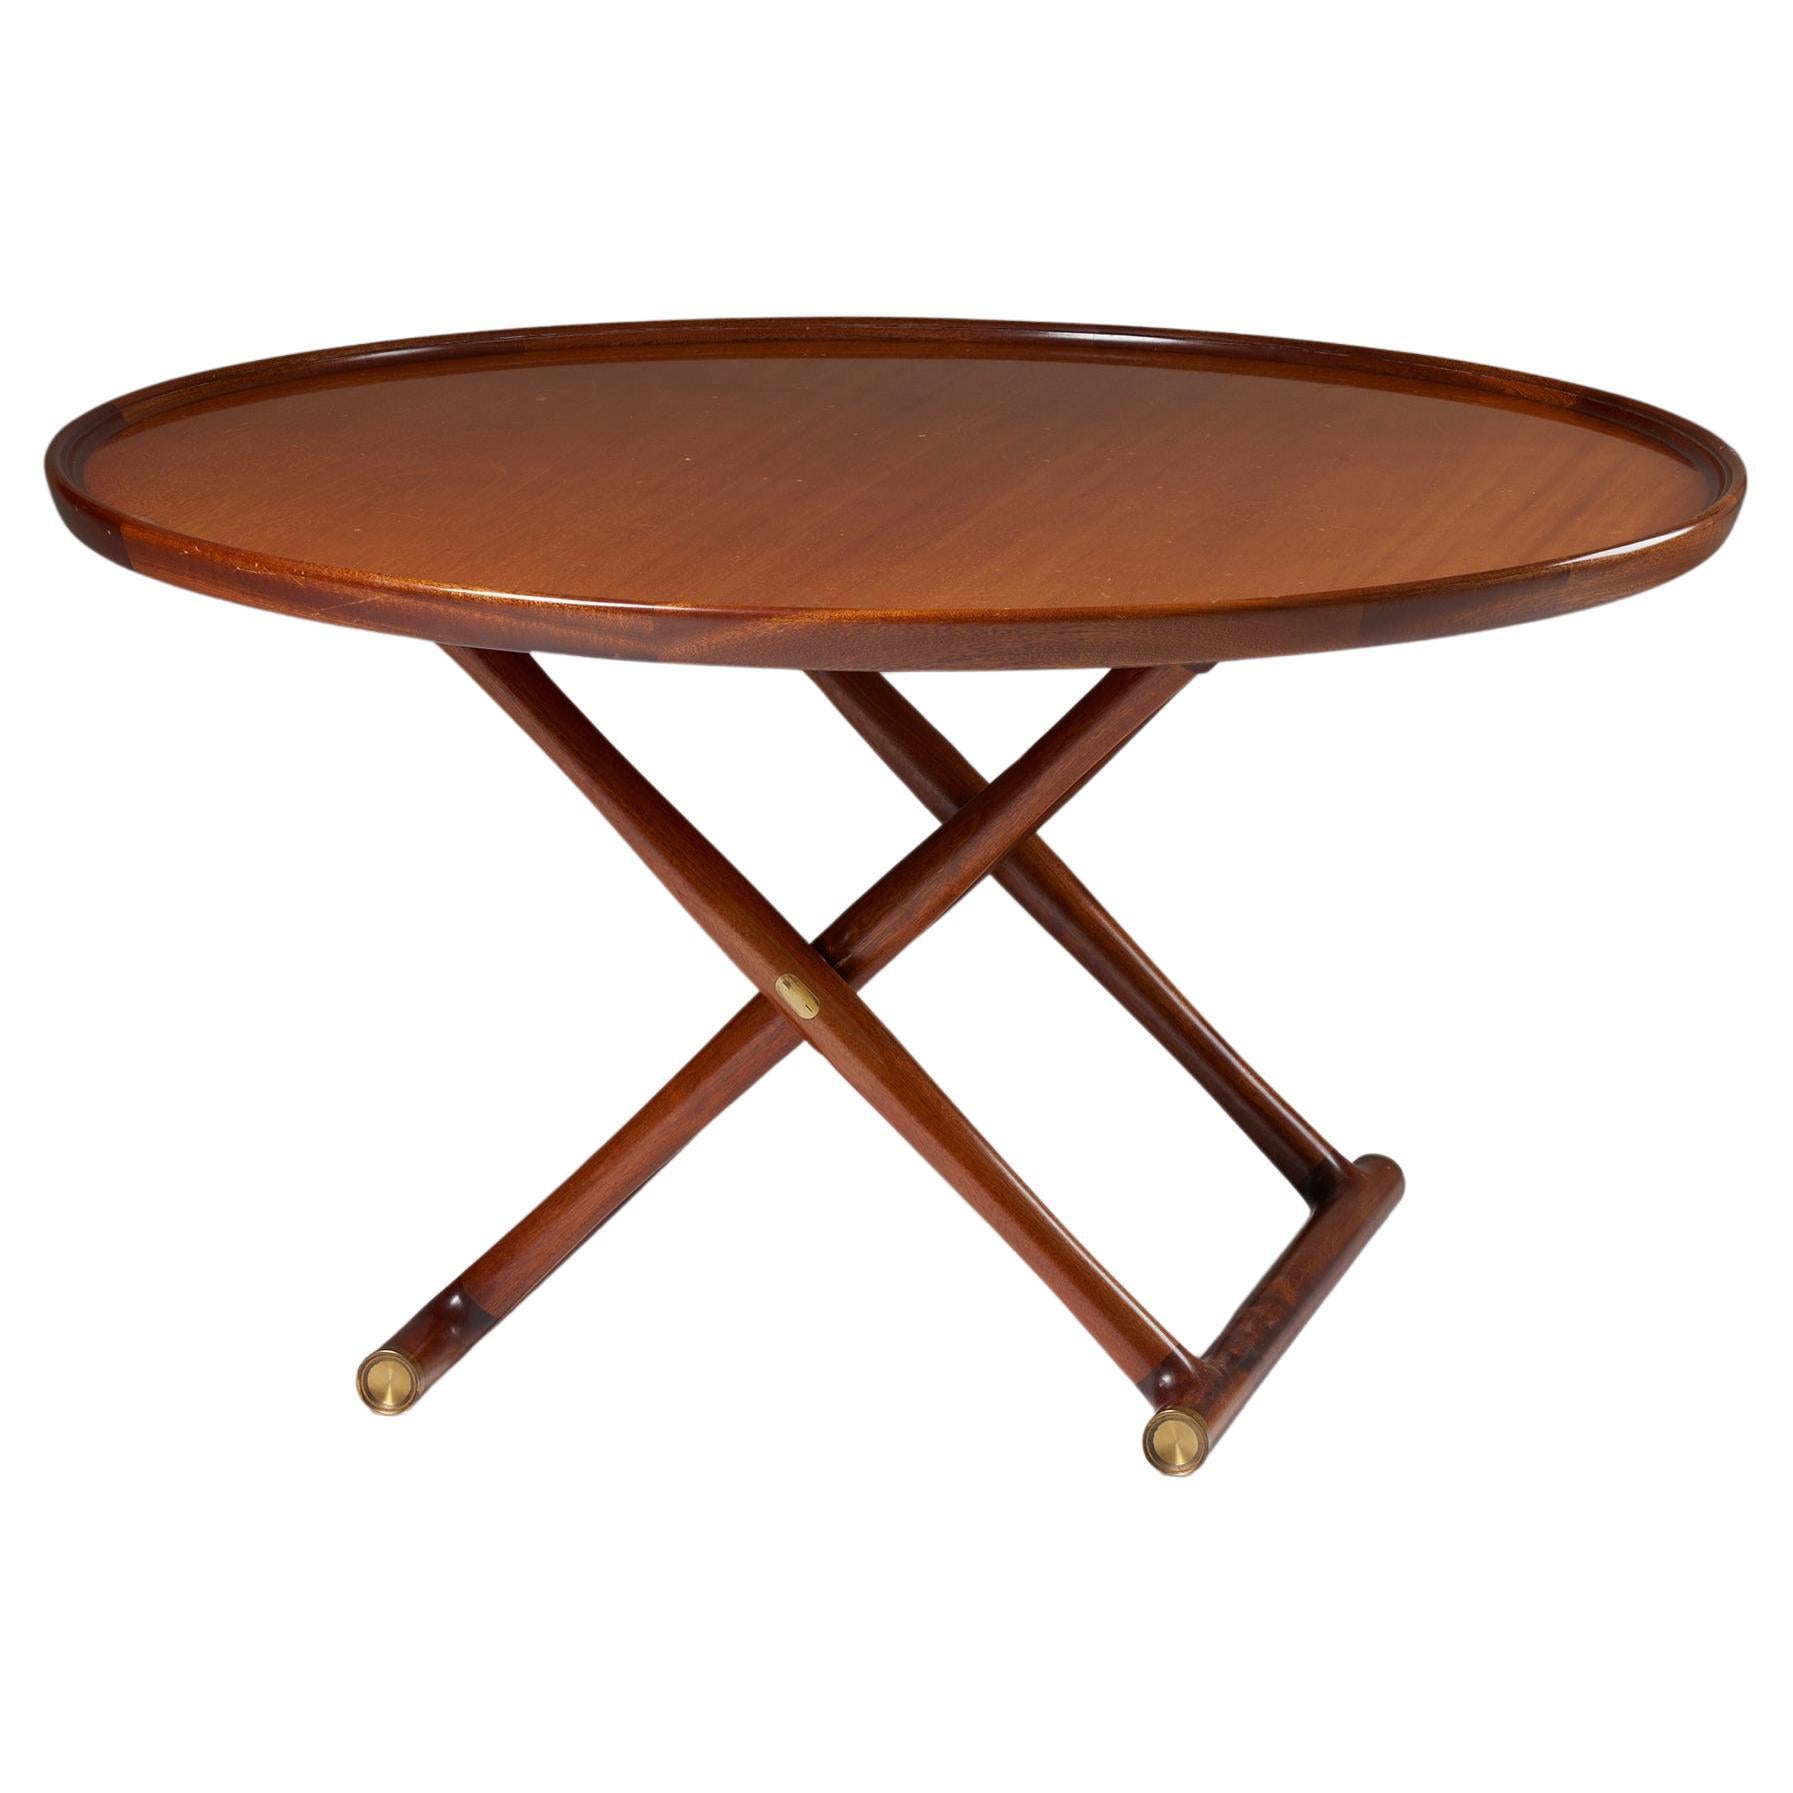 Table d'appoint 'The Egyptian table', am designs By Mogens Lassen, Acajou laiton